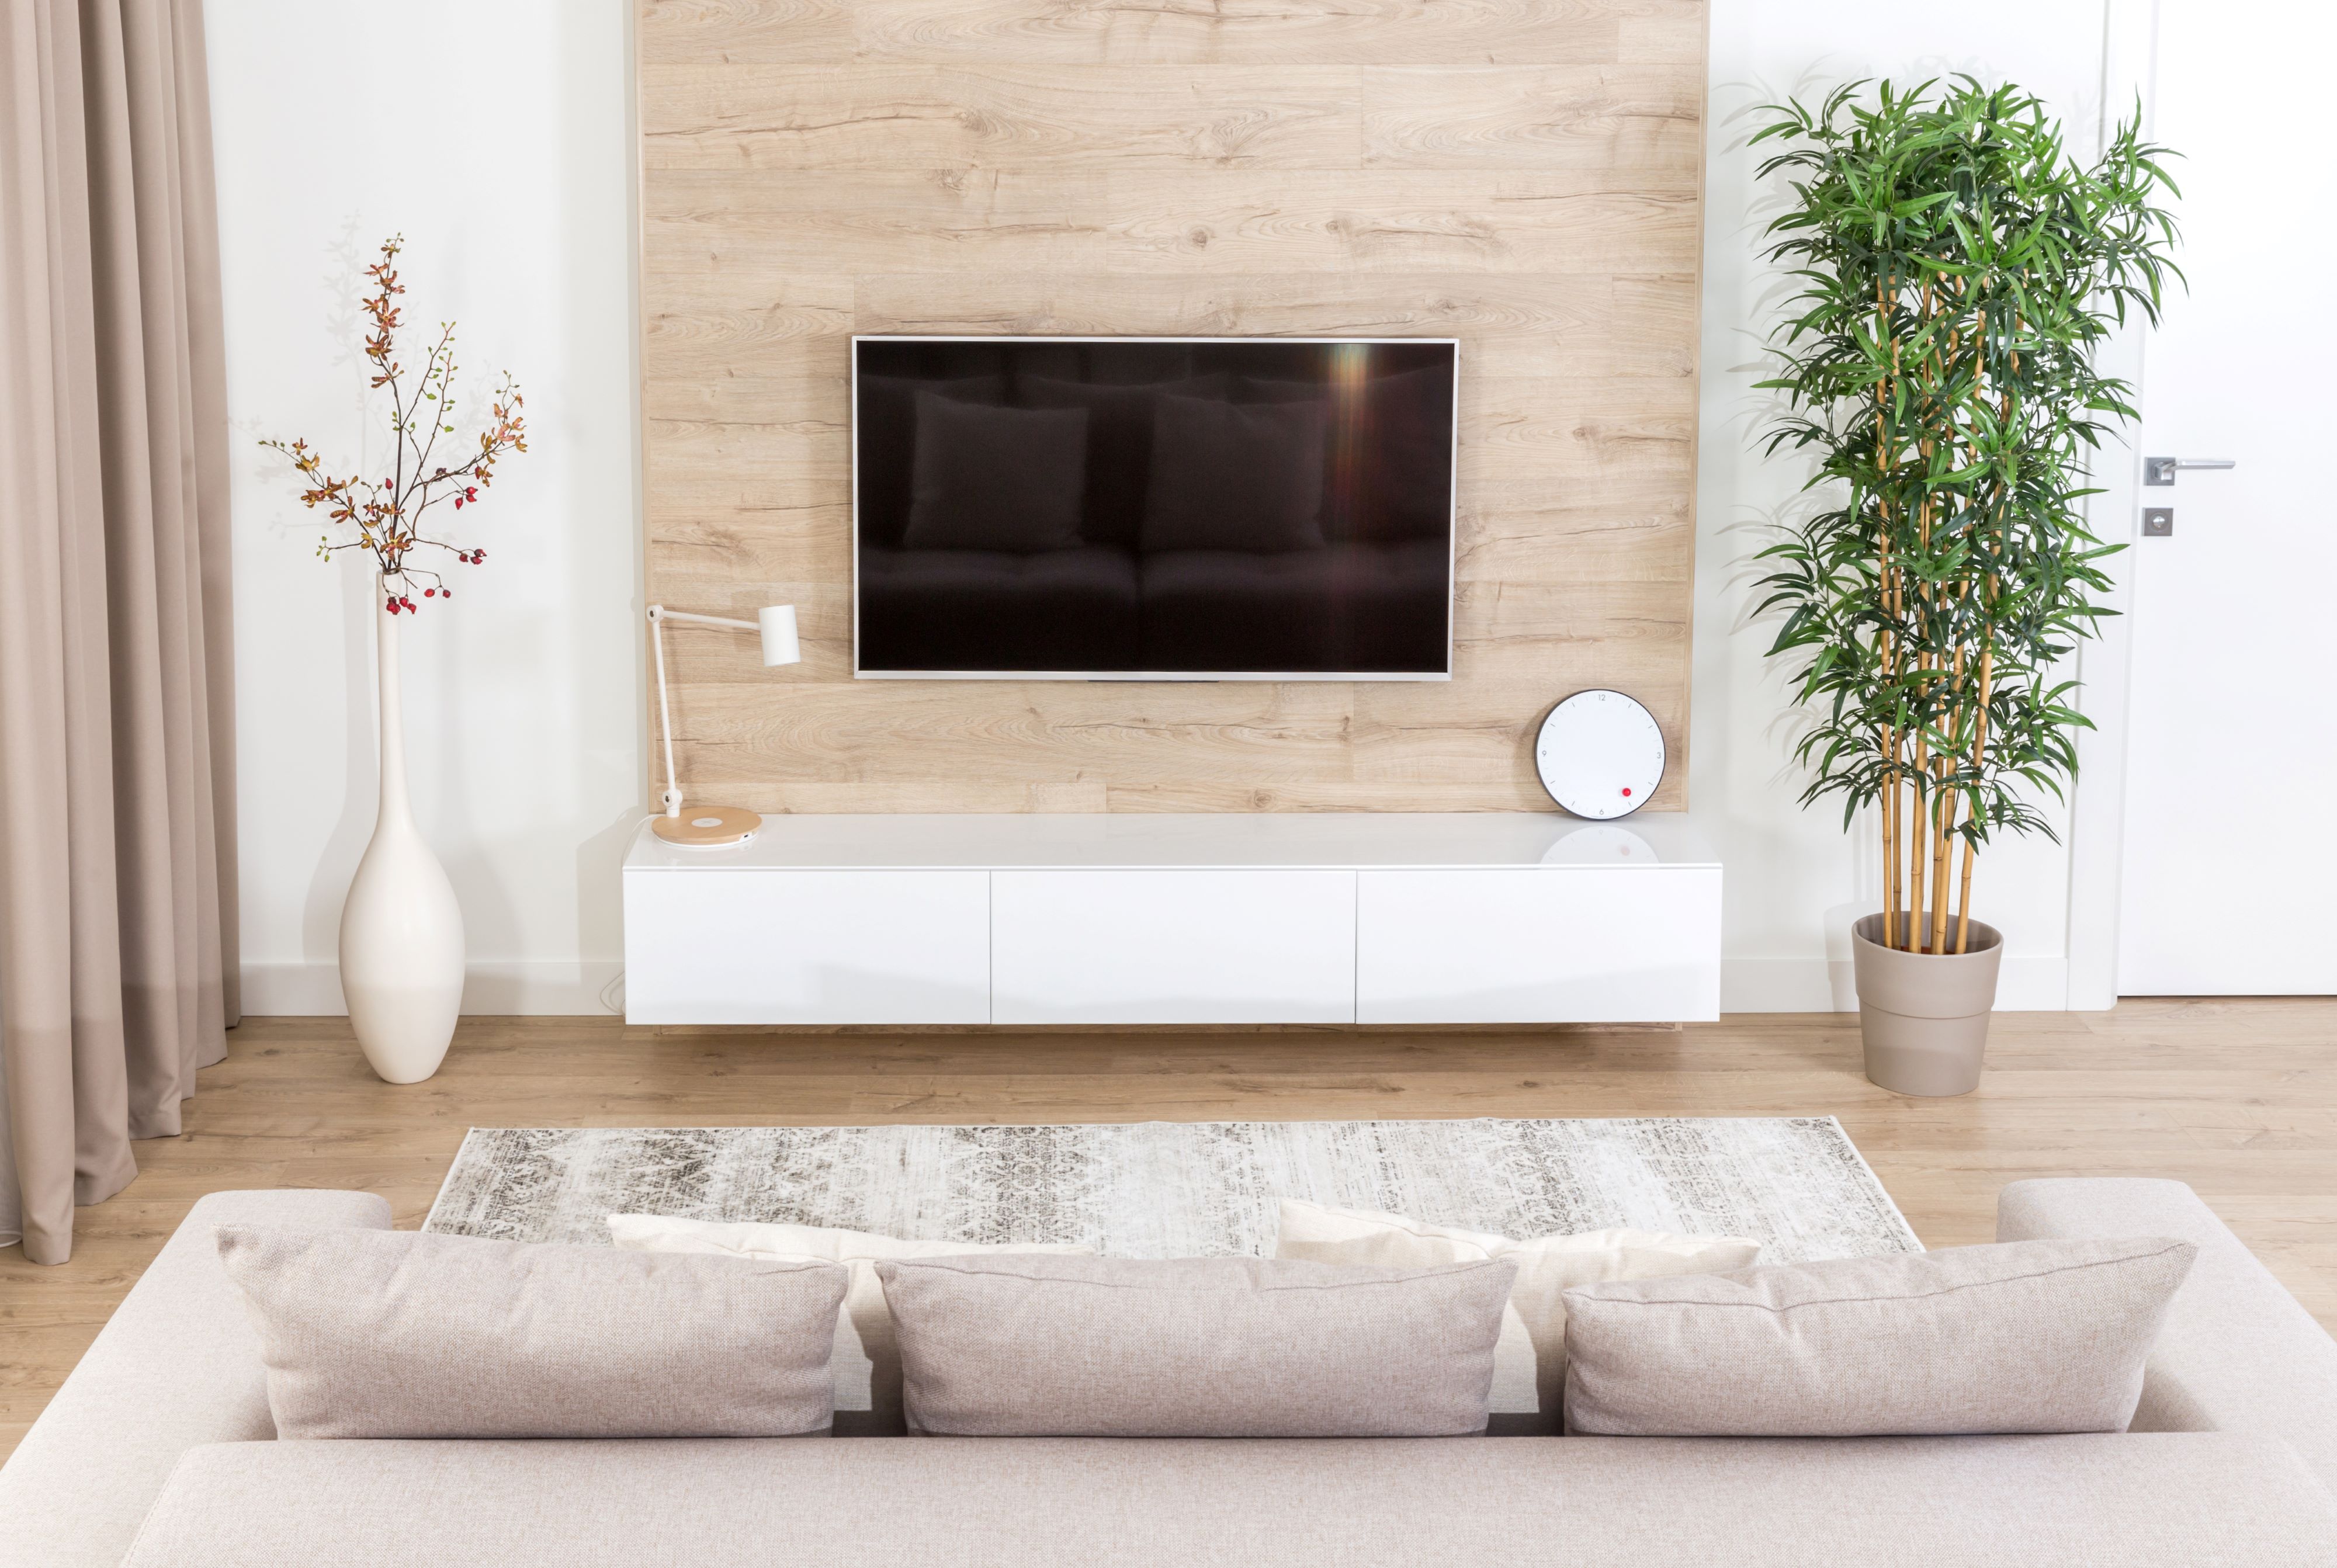 a 40-inch smart TV mounted on the wall in a small modern living room